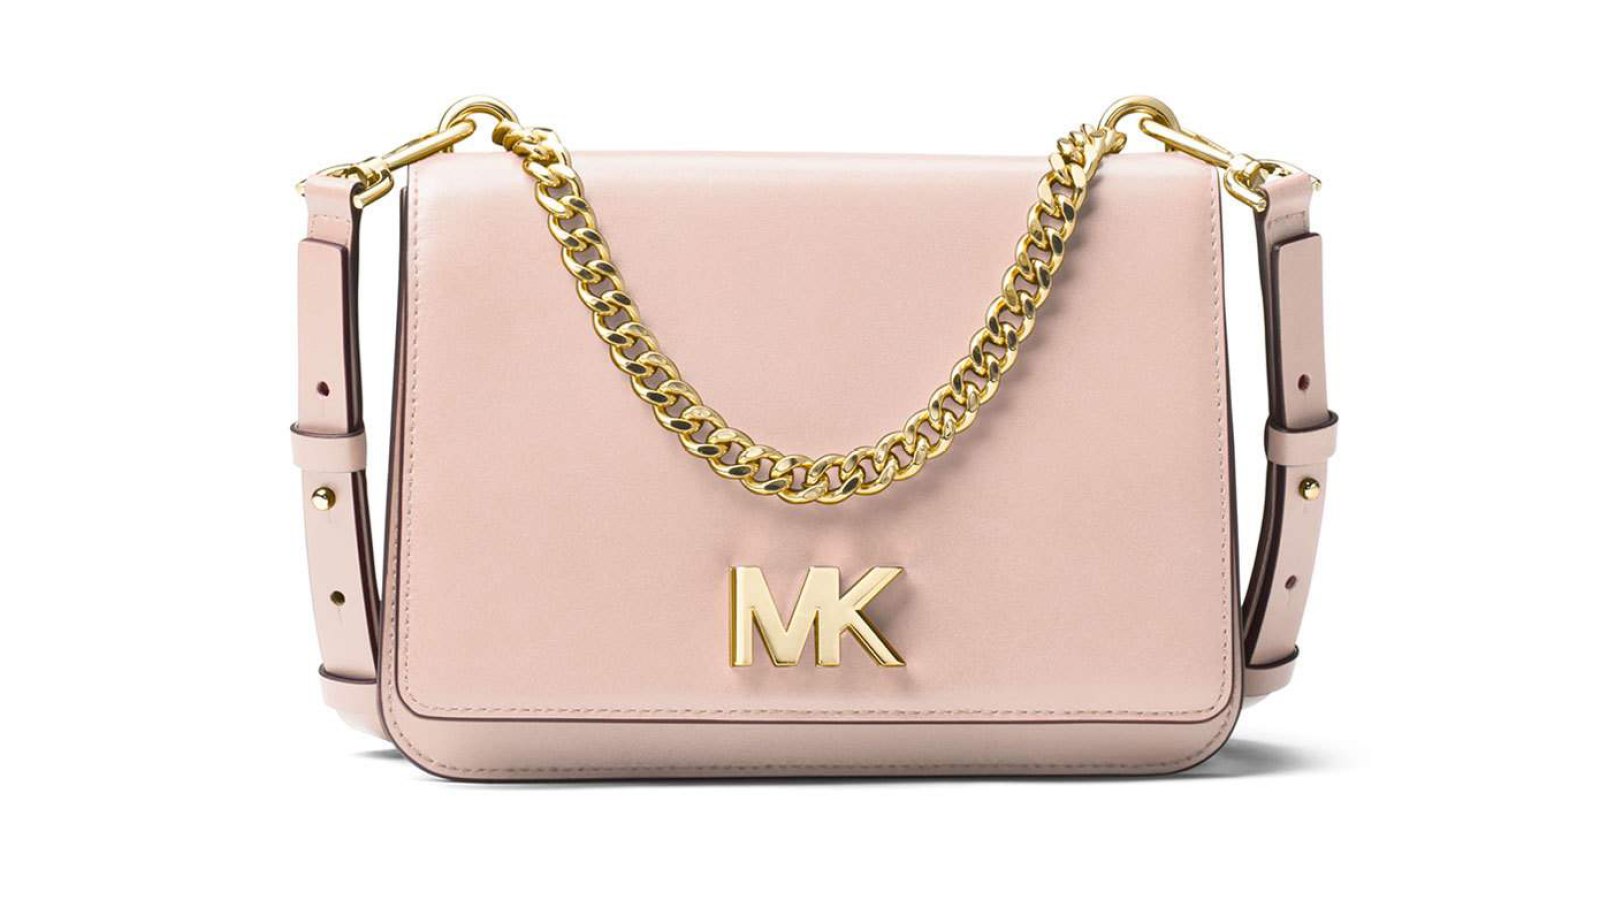 aesthetic, Michael Kors, and pink image